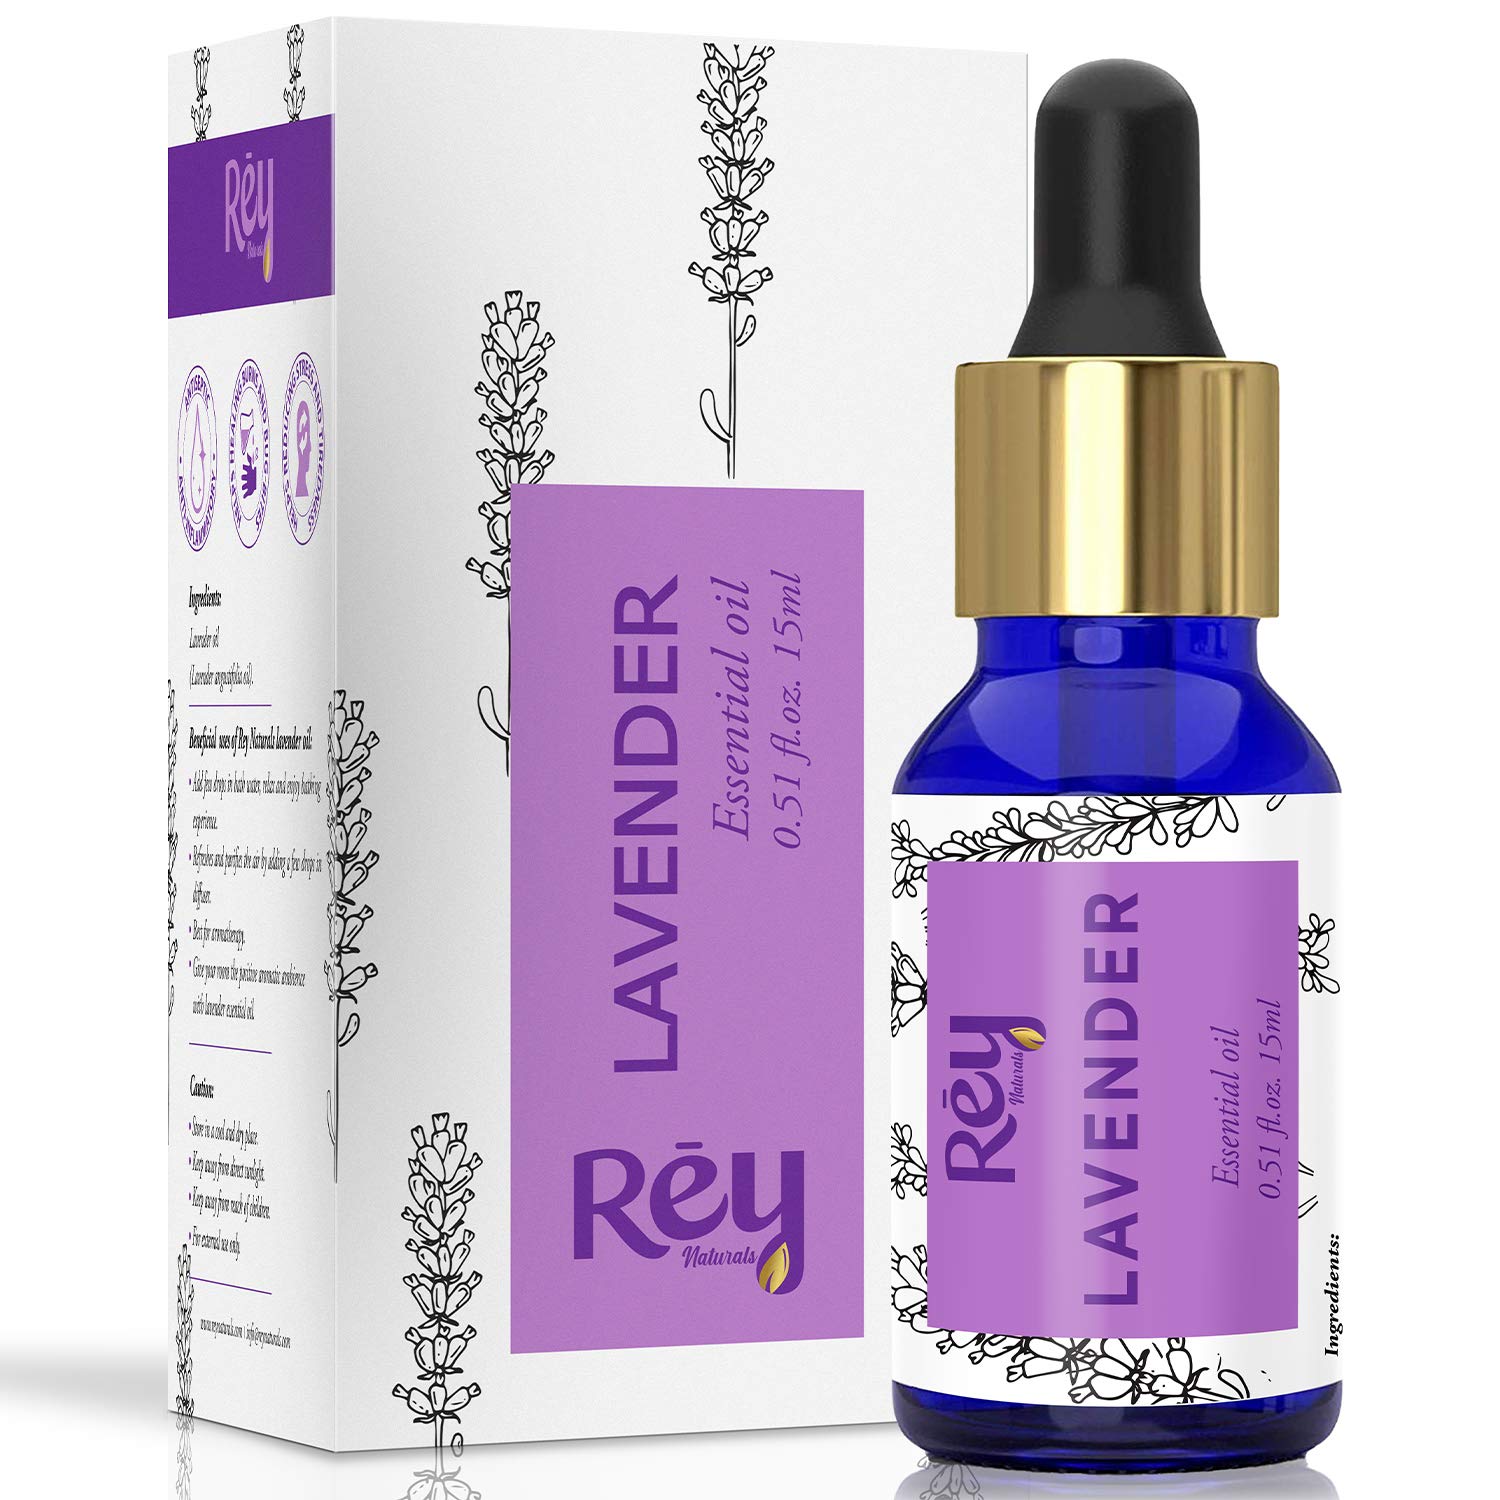 Rey Naturals Lavender Essential Oil - Pure 100% Natural - Healthier Skin and Hair - Calming Bath or Massage for Restful Sleep - Diffuser-Ready for Aromatherapy - 30 ml (15 ml x 2) super saver combo …